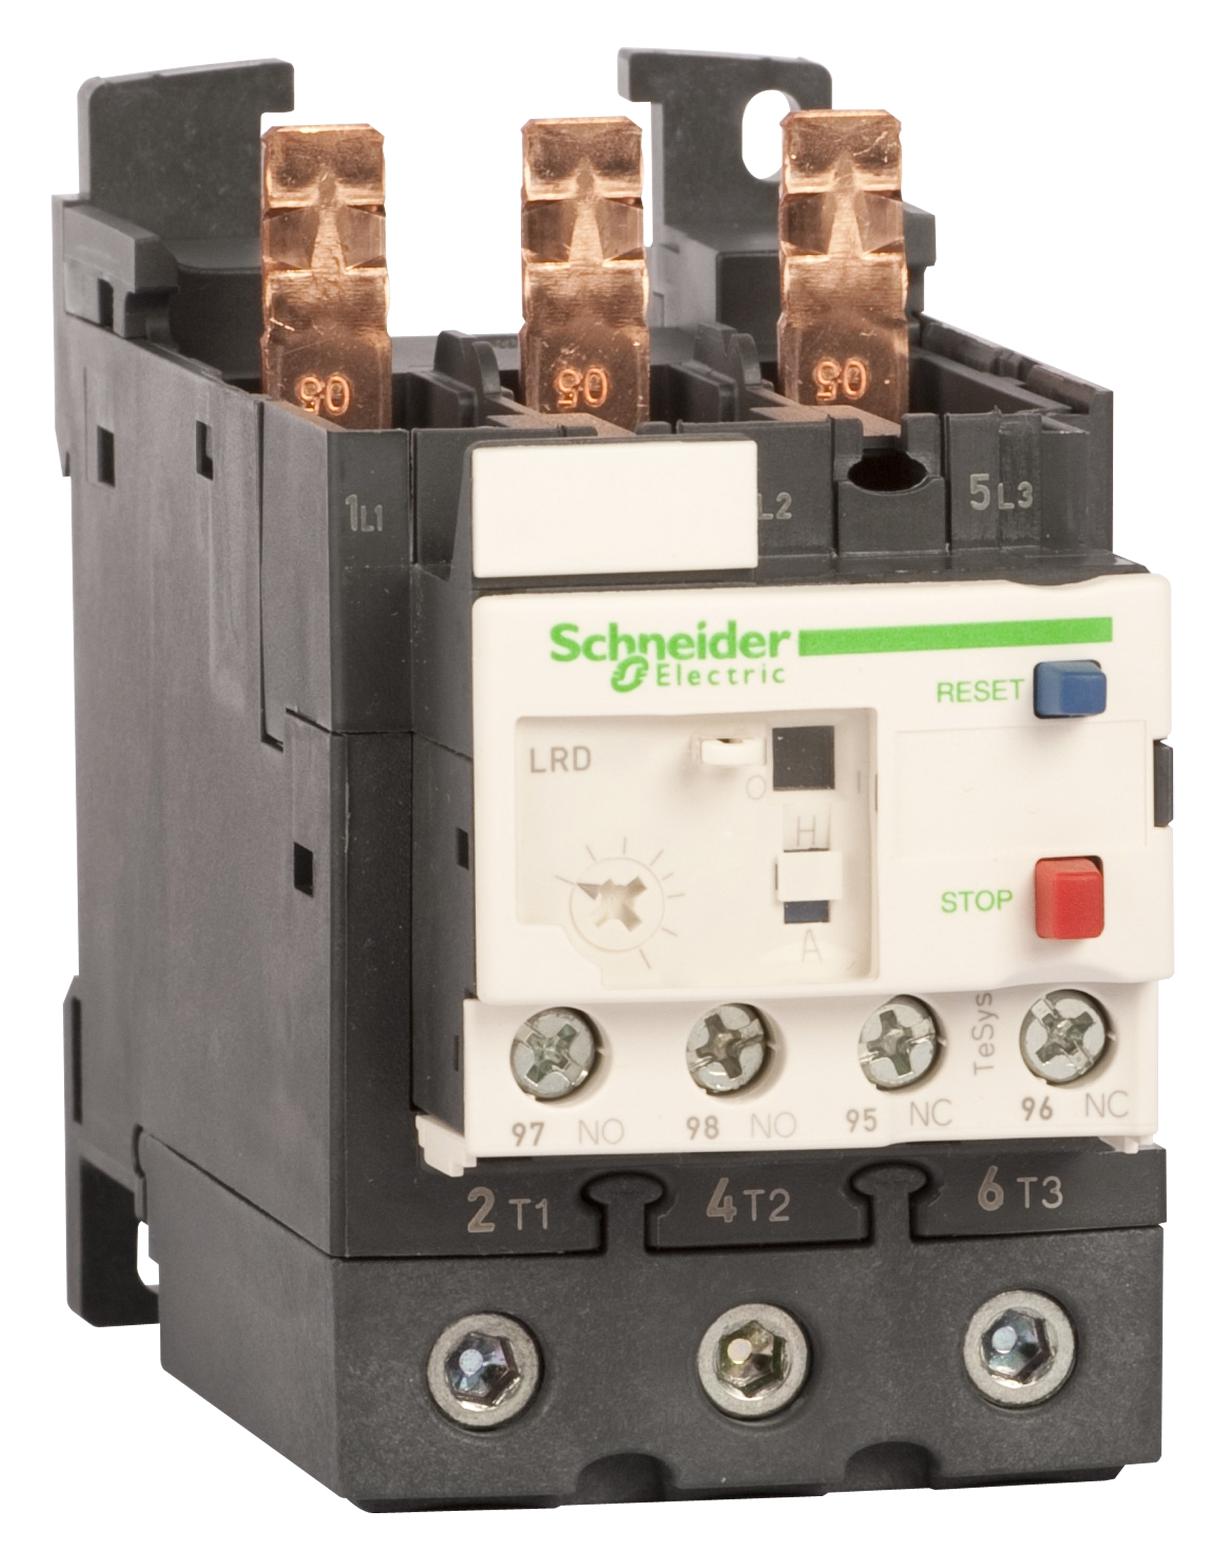 LRD318 THERMAL OVERLOAD RELAY, 12A-18A, 690VAC SCHNEIDER ELECTRIC